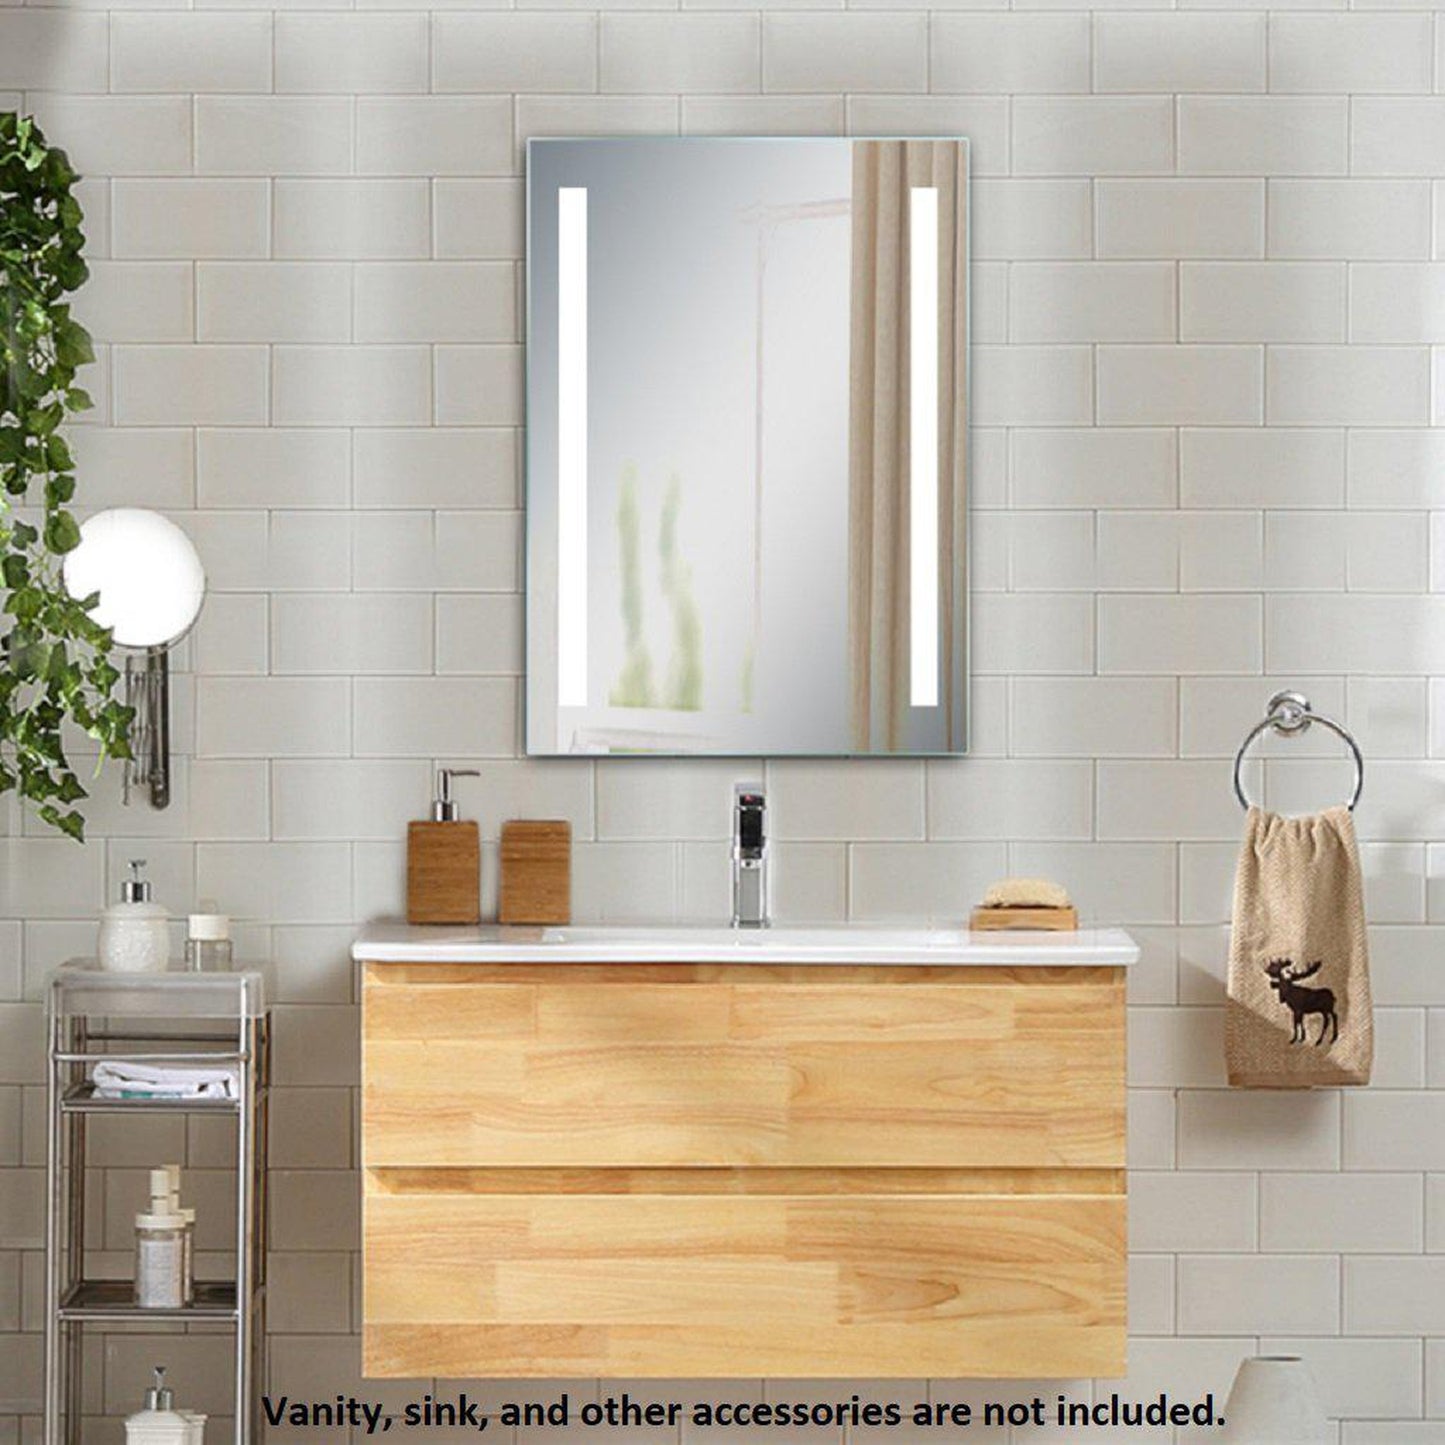 Lighted Impressions Maxx 20" x 28" Rectangular Frameless Wall-Mounted LED Mirror With 3-Way Rocker Switch